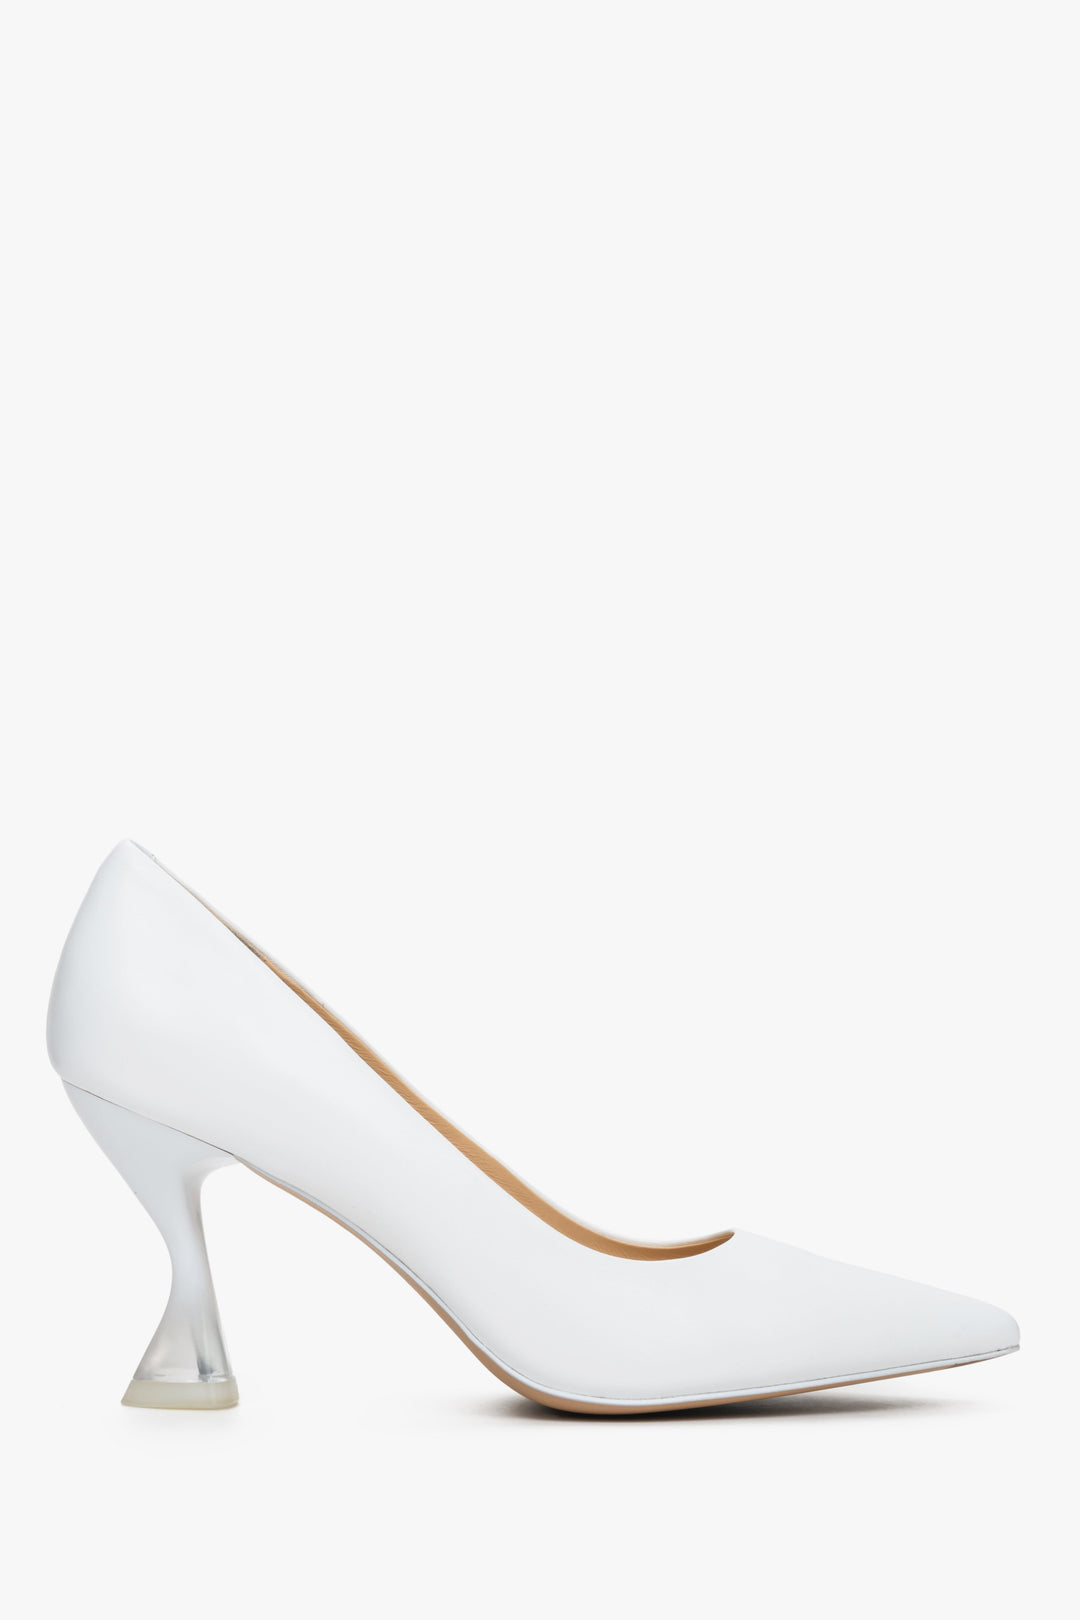 Women's White High-Heeled Pumps made of Genuine Leather Estro ER00112788.